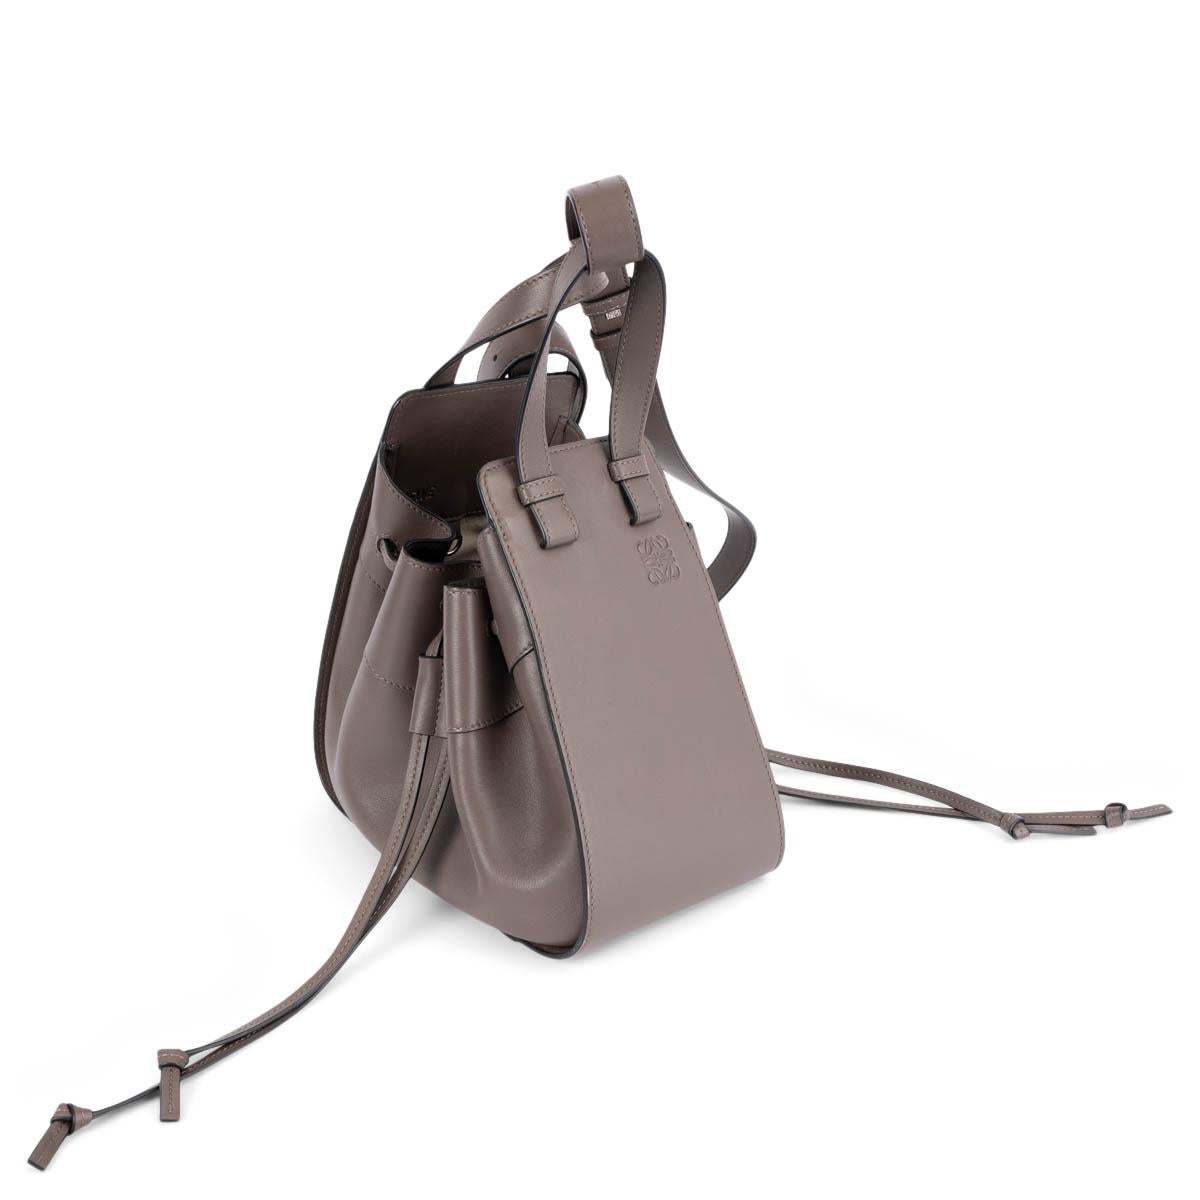 100% authentic Loewe Hammock Small shoulder in dark taupe calfskin. Features two half-round handles and is embellished with an embossed logo on the side. The design comes with a detachable and adjustable shoulder strap and drawstring closure on the